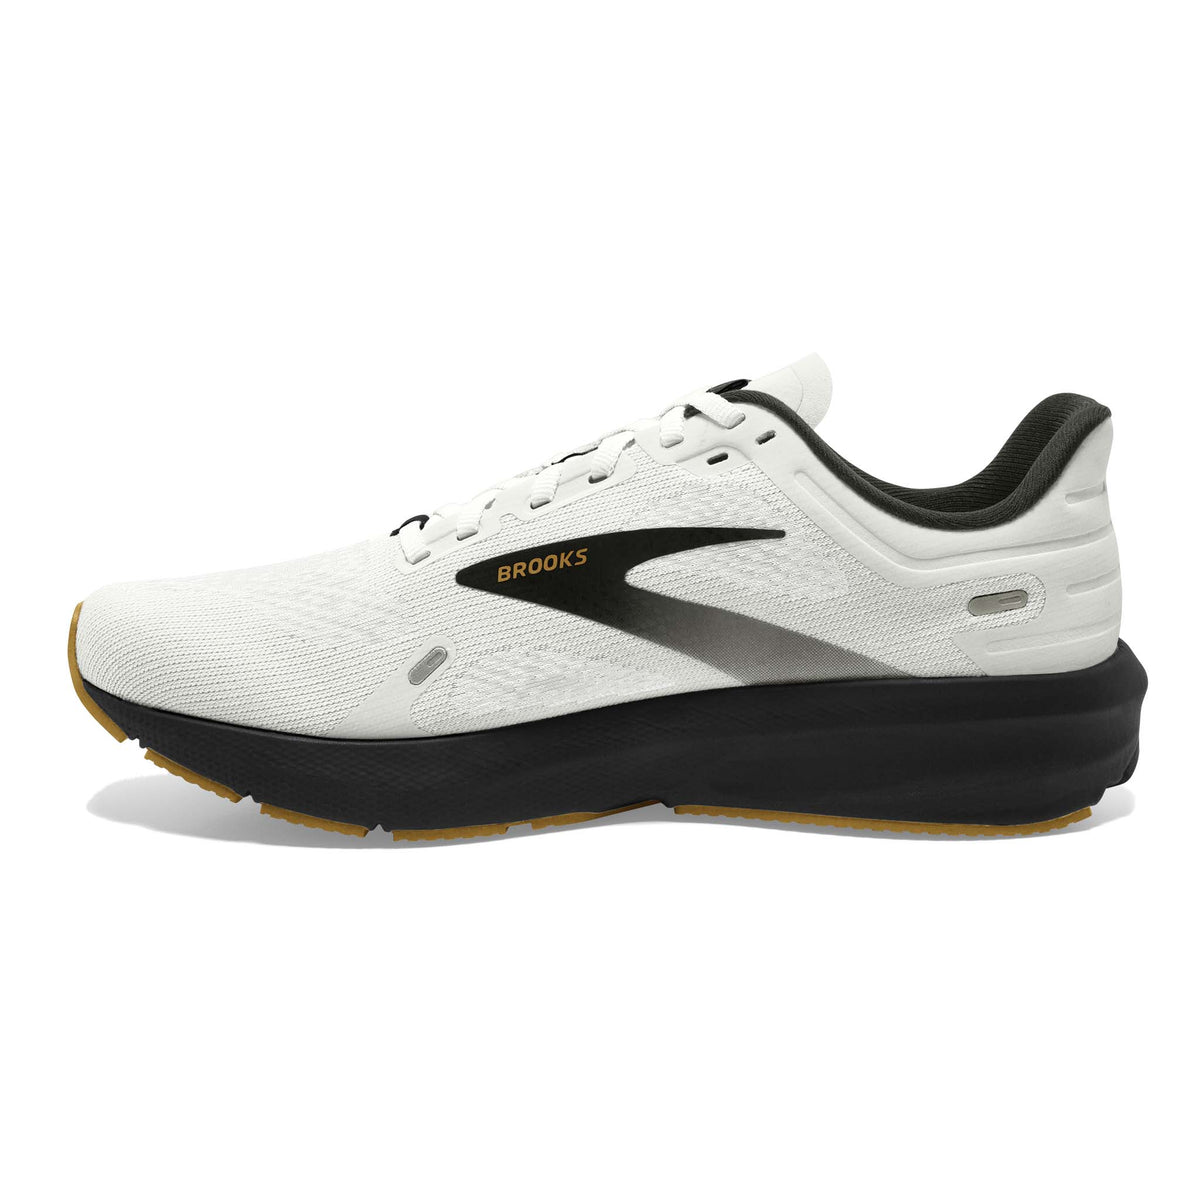 Brooks Launch 9 running homme lateral- white black tan